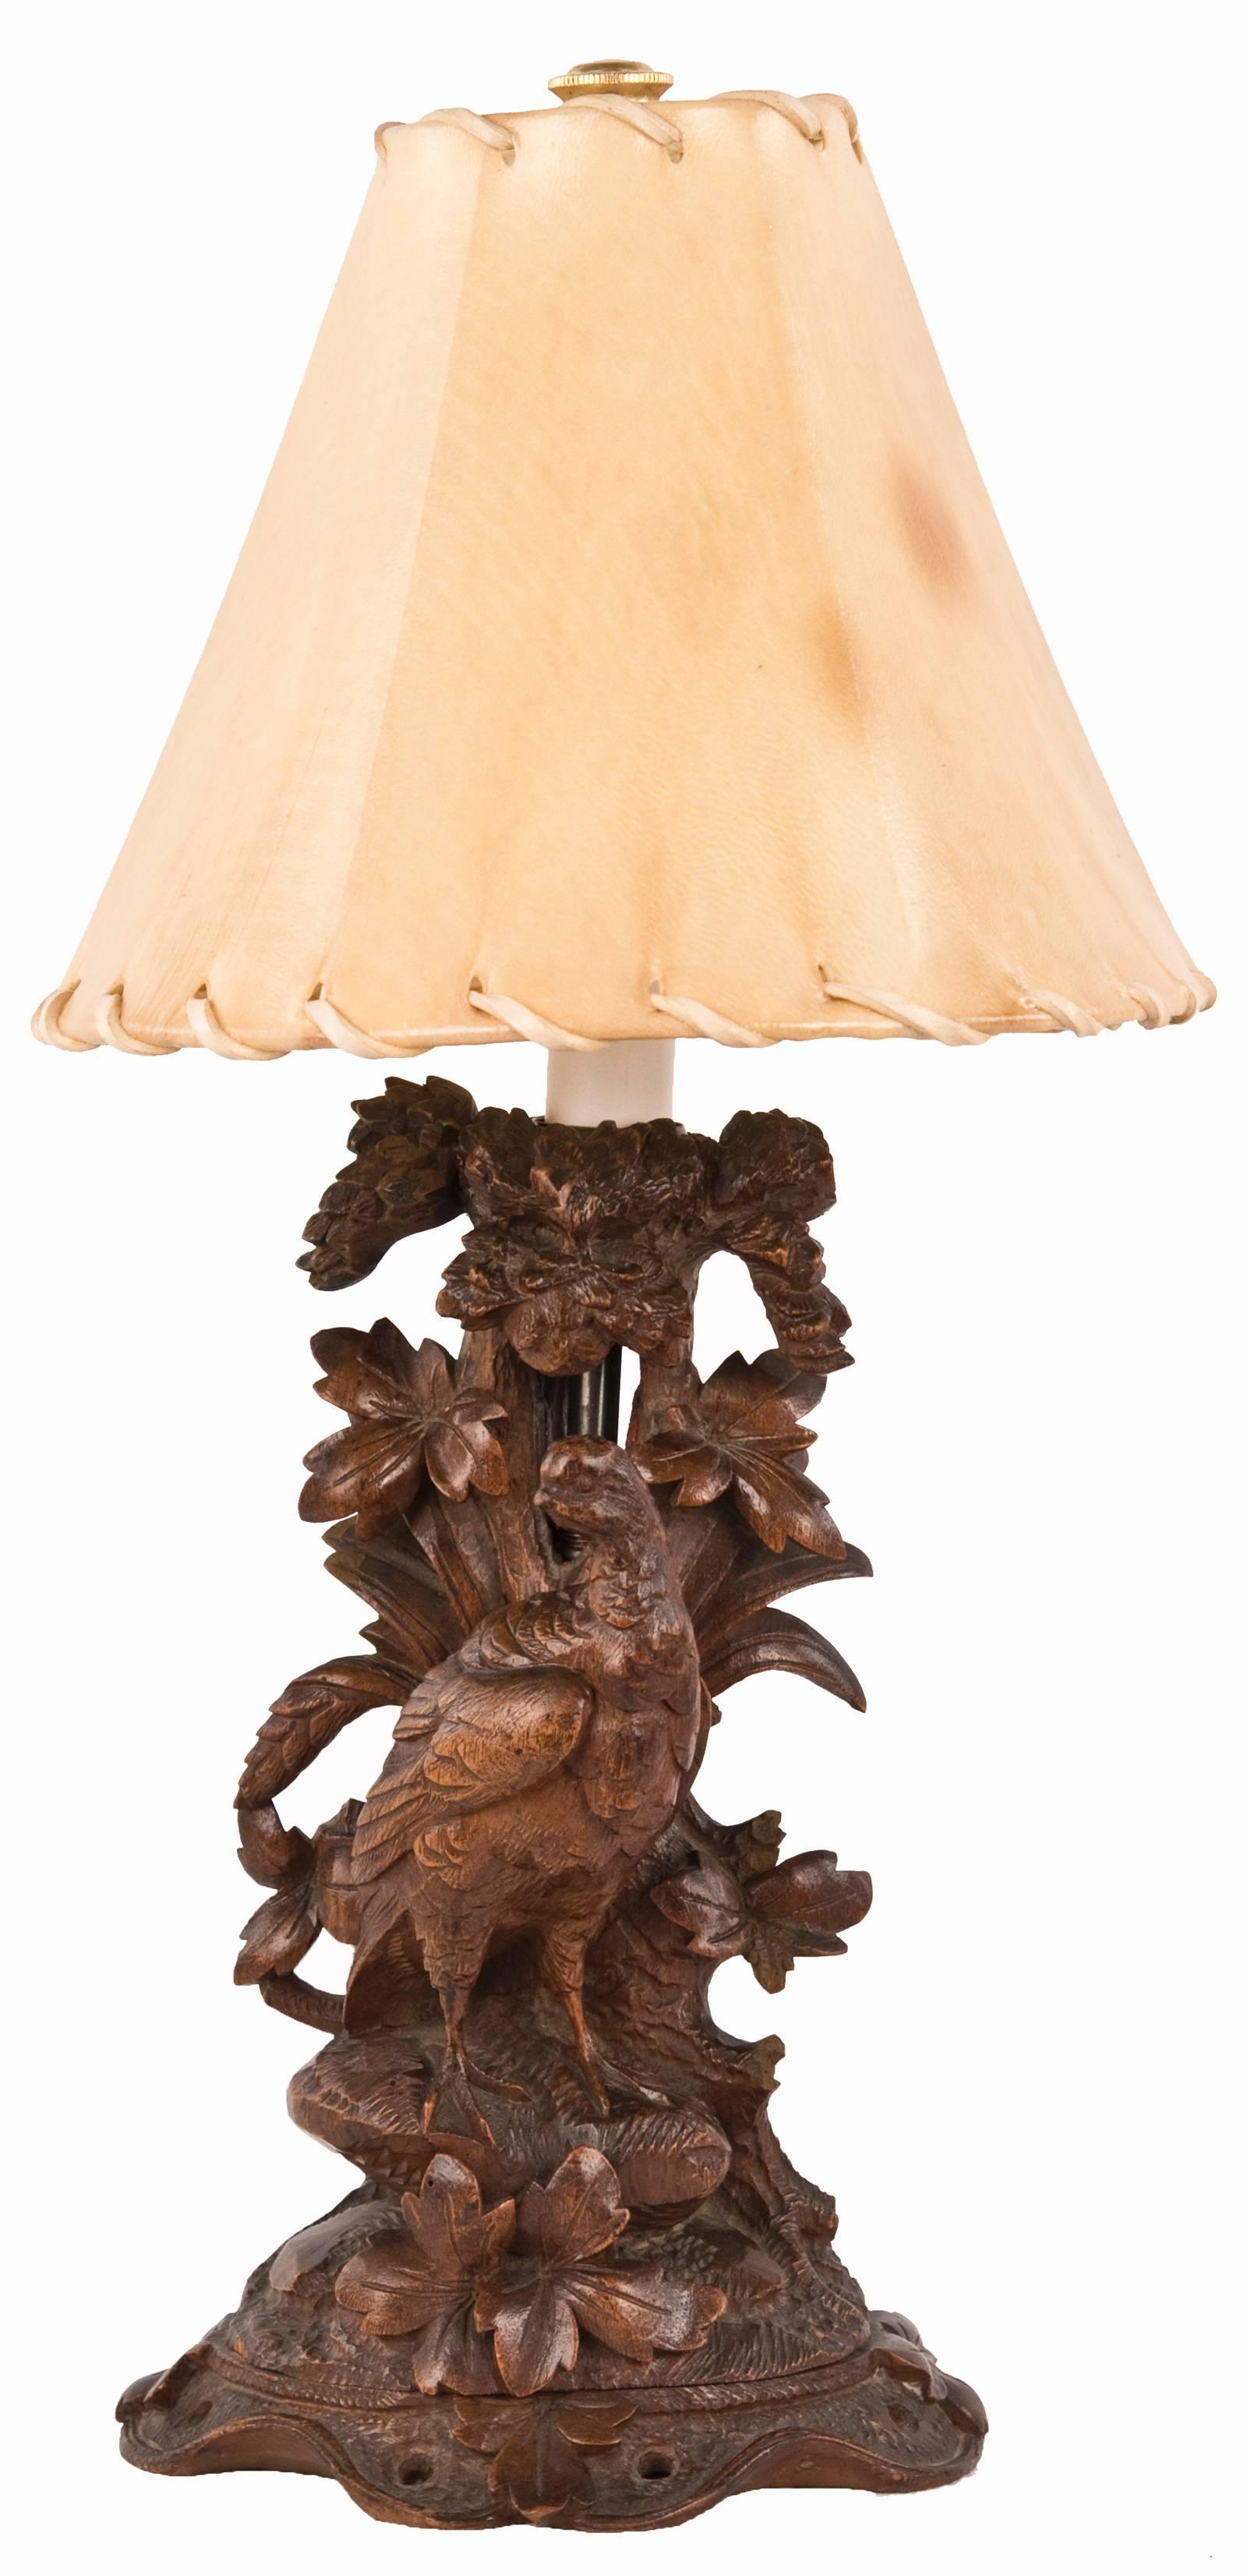 A pair of elaborately carved wood table lamps in the Black Forest style popular in the late 19th century. Opposing pheasants are perched on rocky ground, against a trunk, foliage and pine cones, the figures on a similarly carved base and topped with